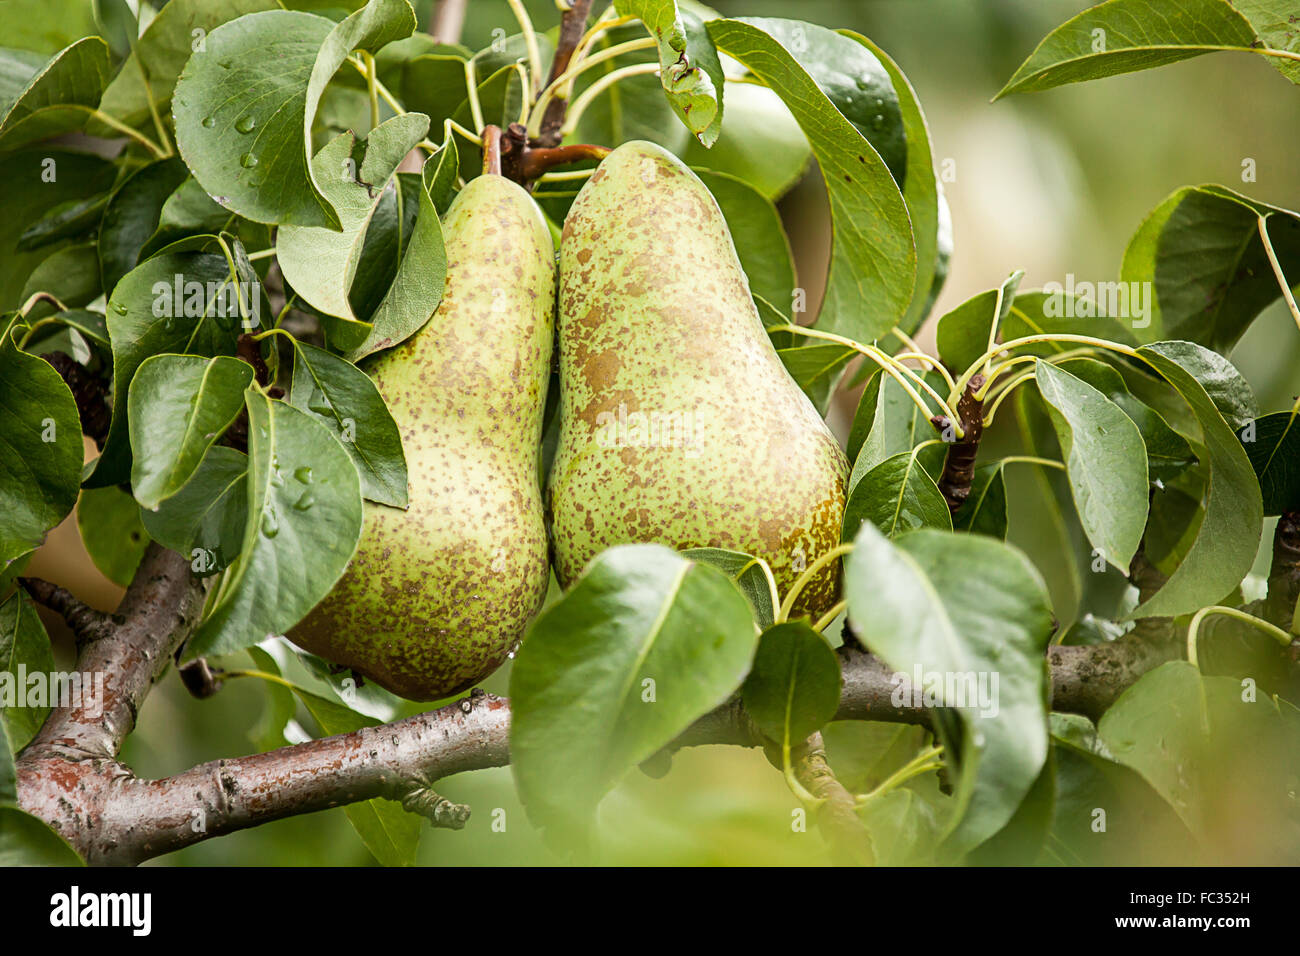 Pear Conference (Pyrus communis) Stock Photo